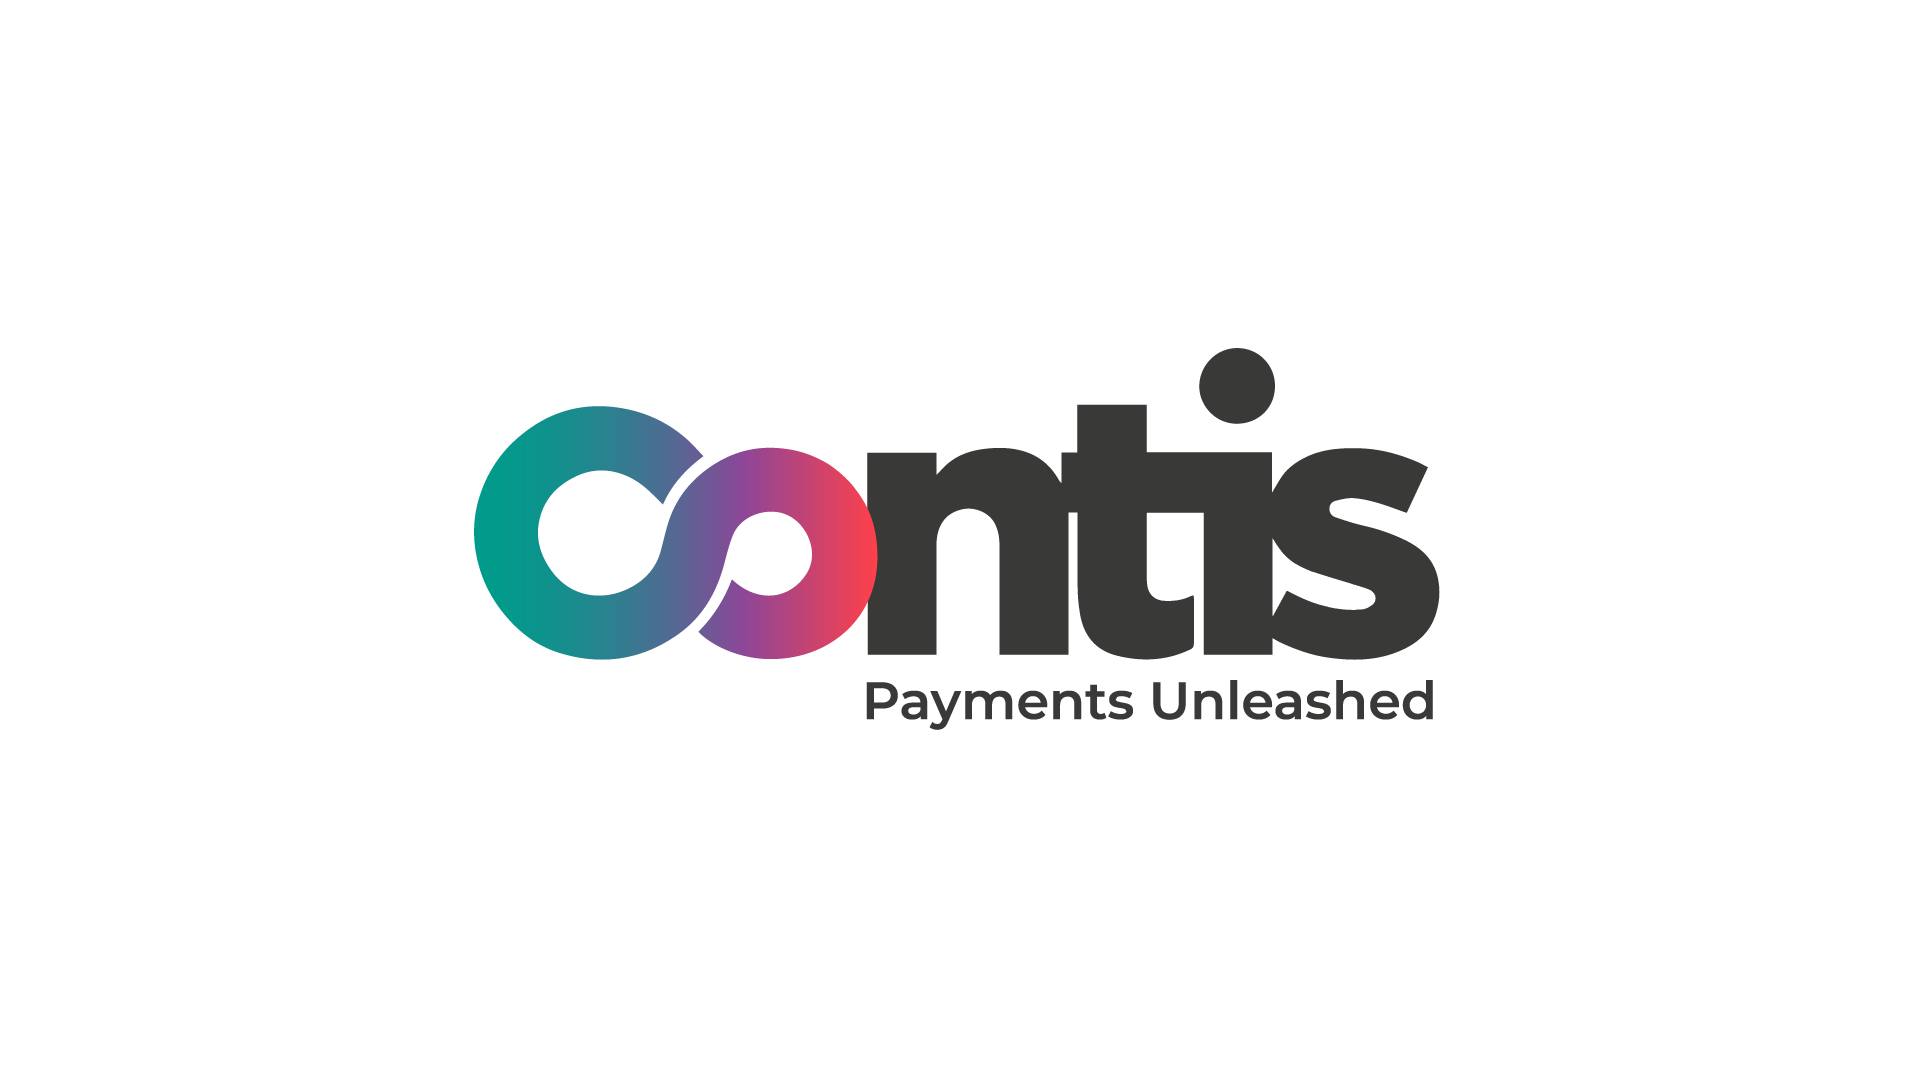 Contis Enables More Choice over £100 Contactless Cap